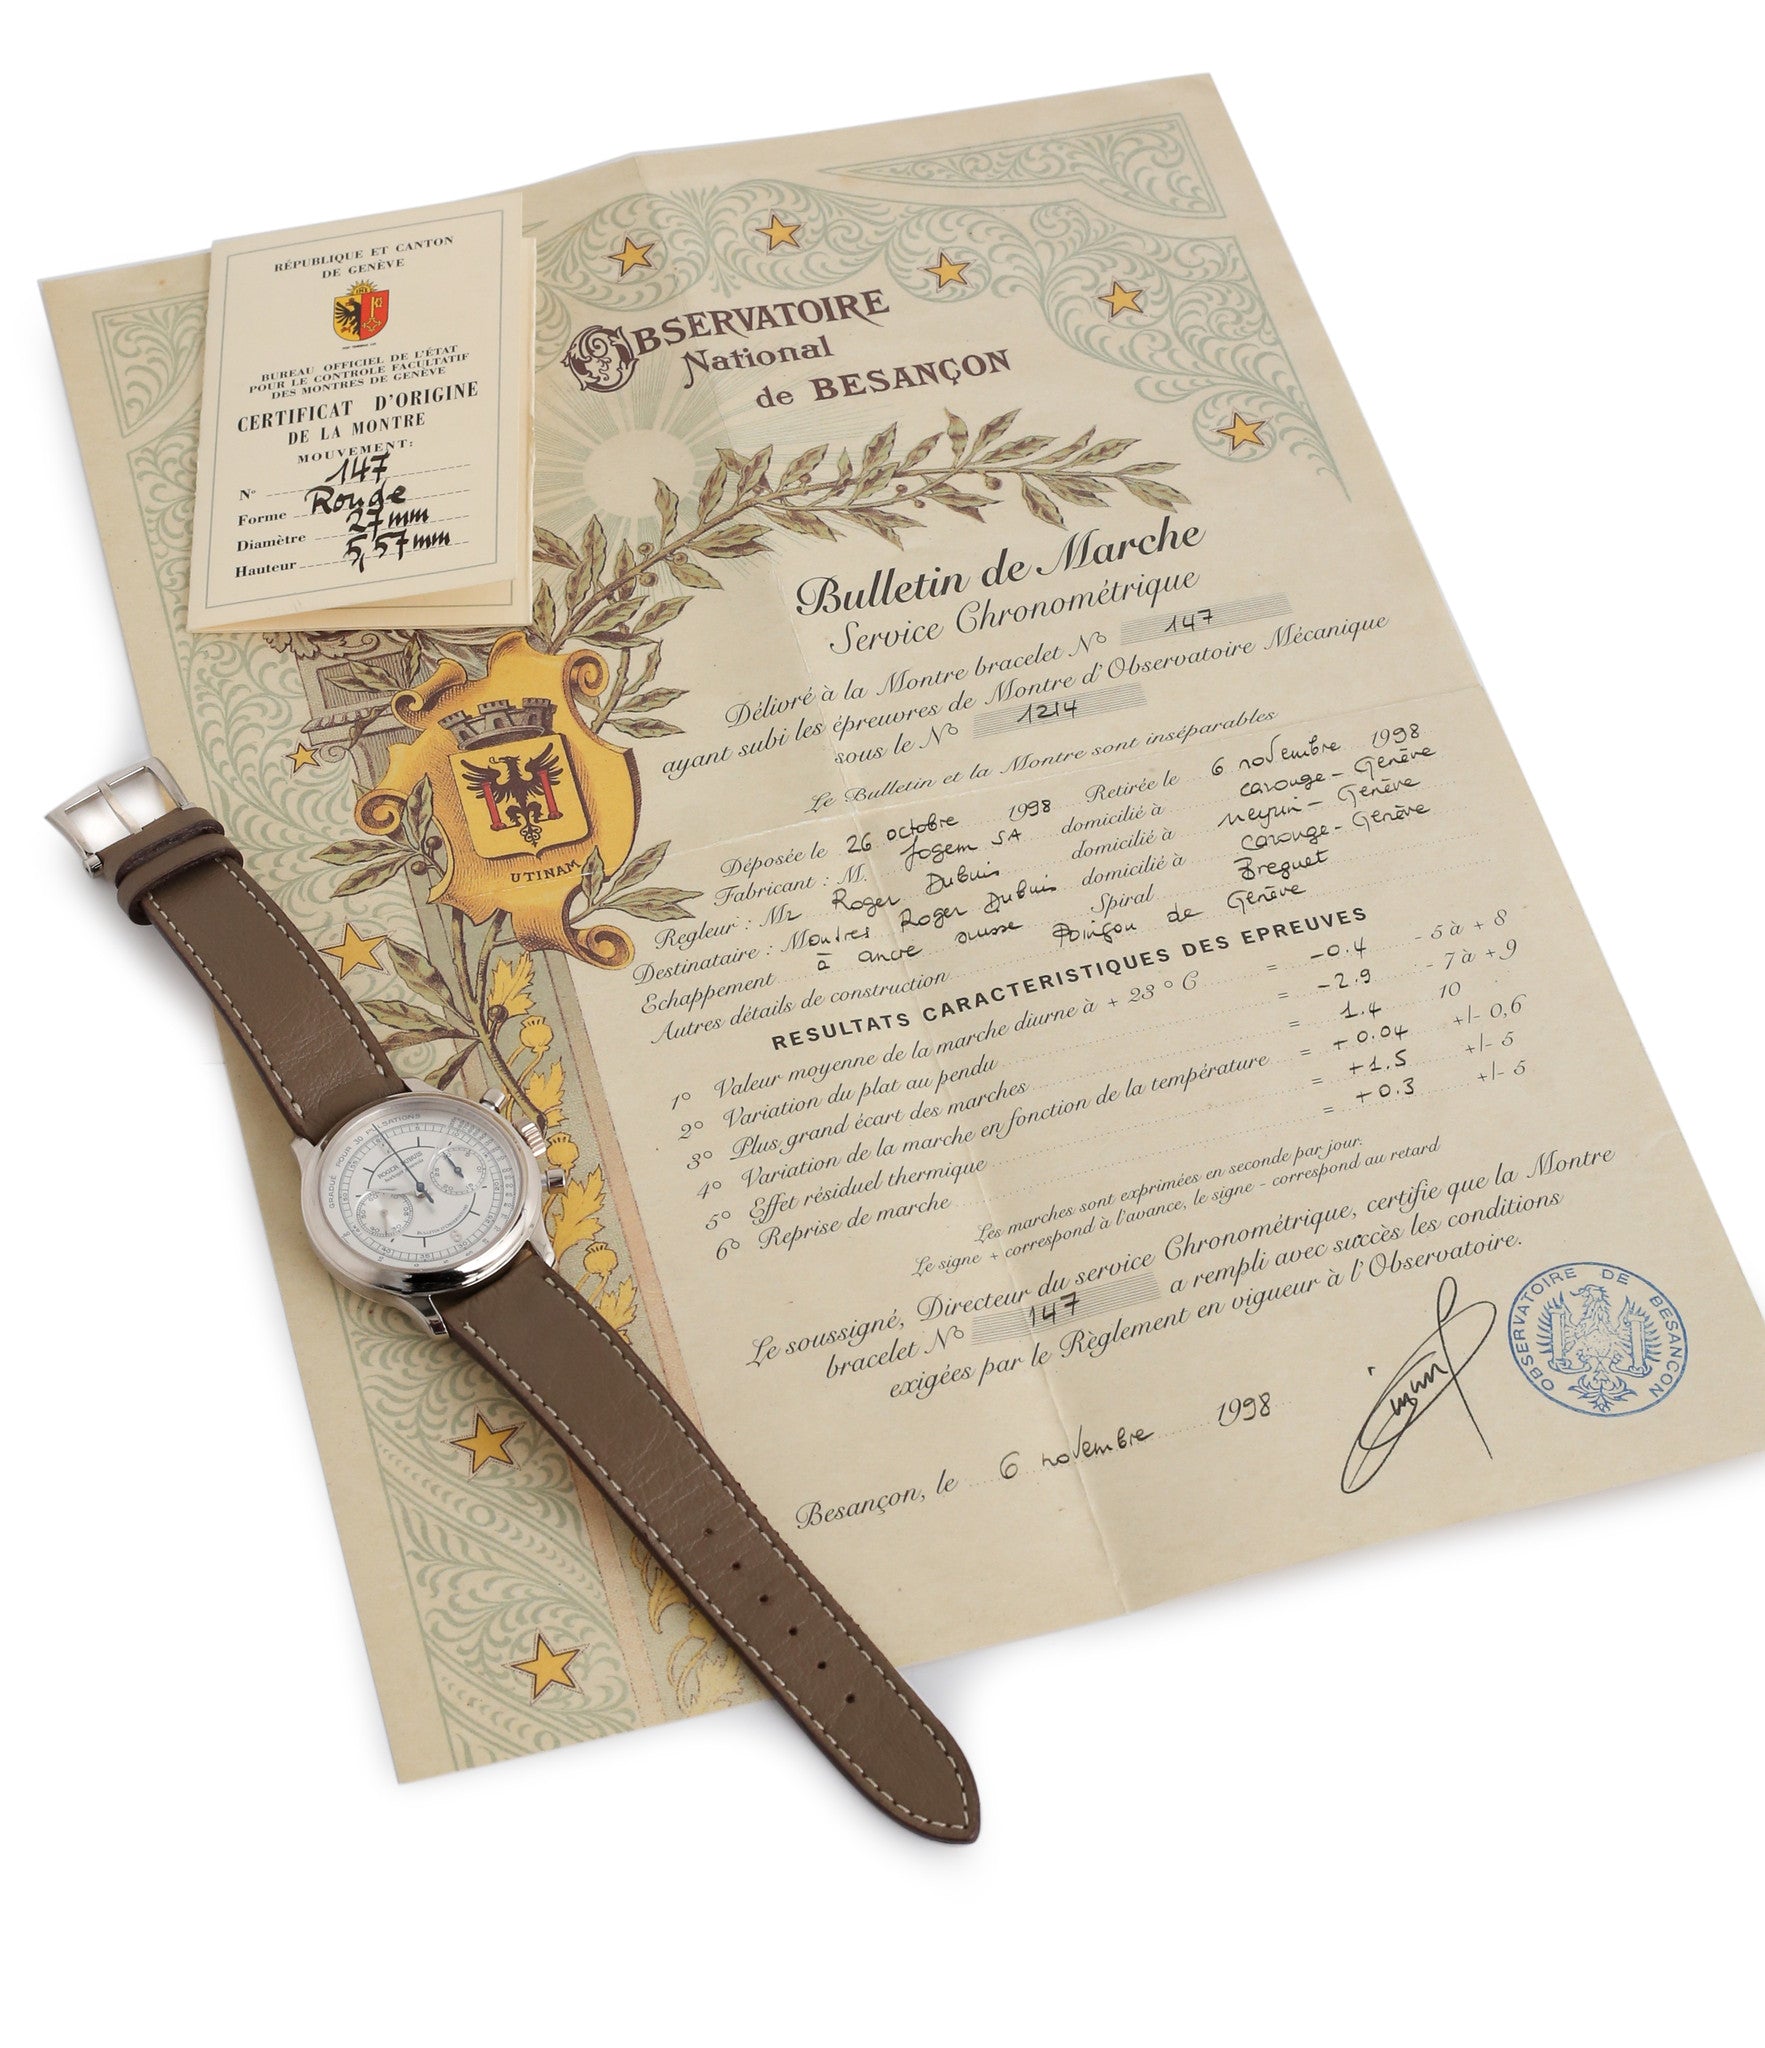 Besancon Certificate with Roger Dubuis Hommage Chronograph early rare watch H37 560 online at a Collcted Man